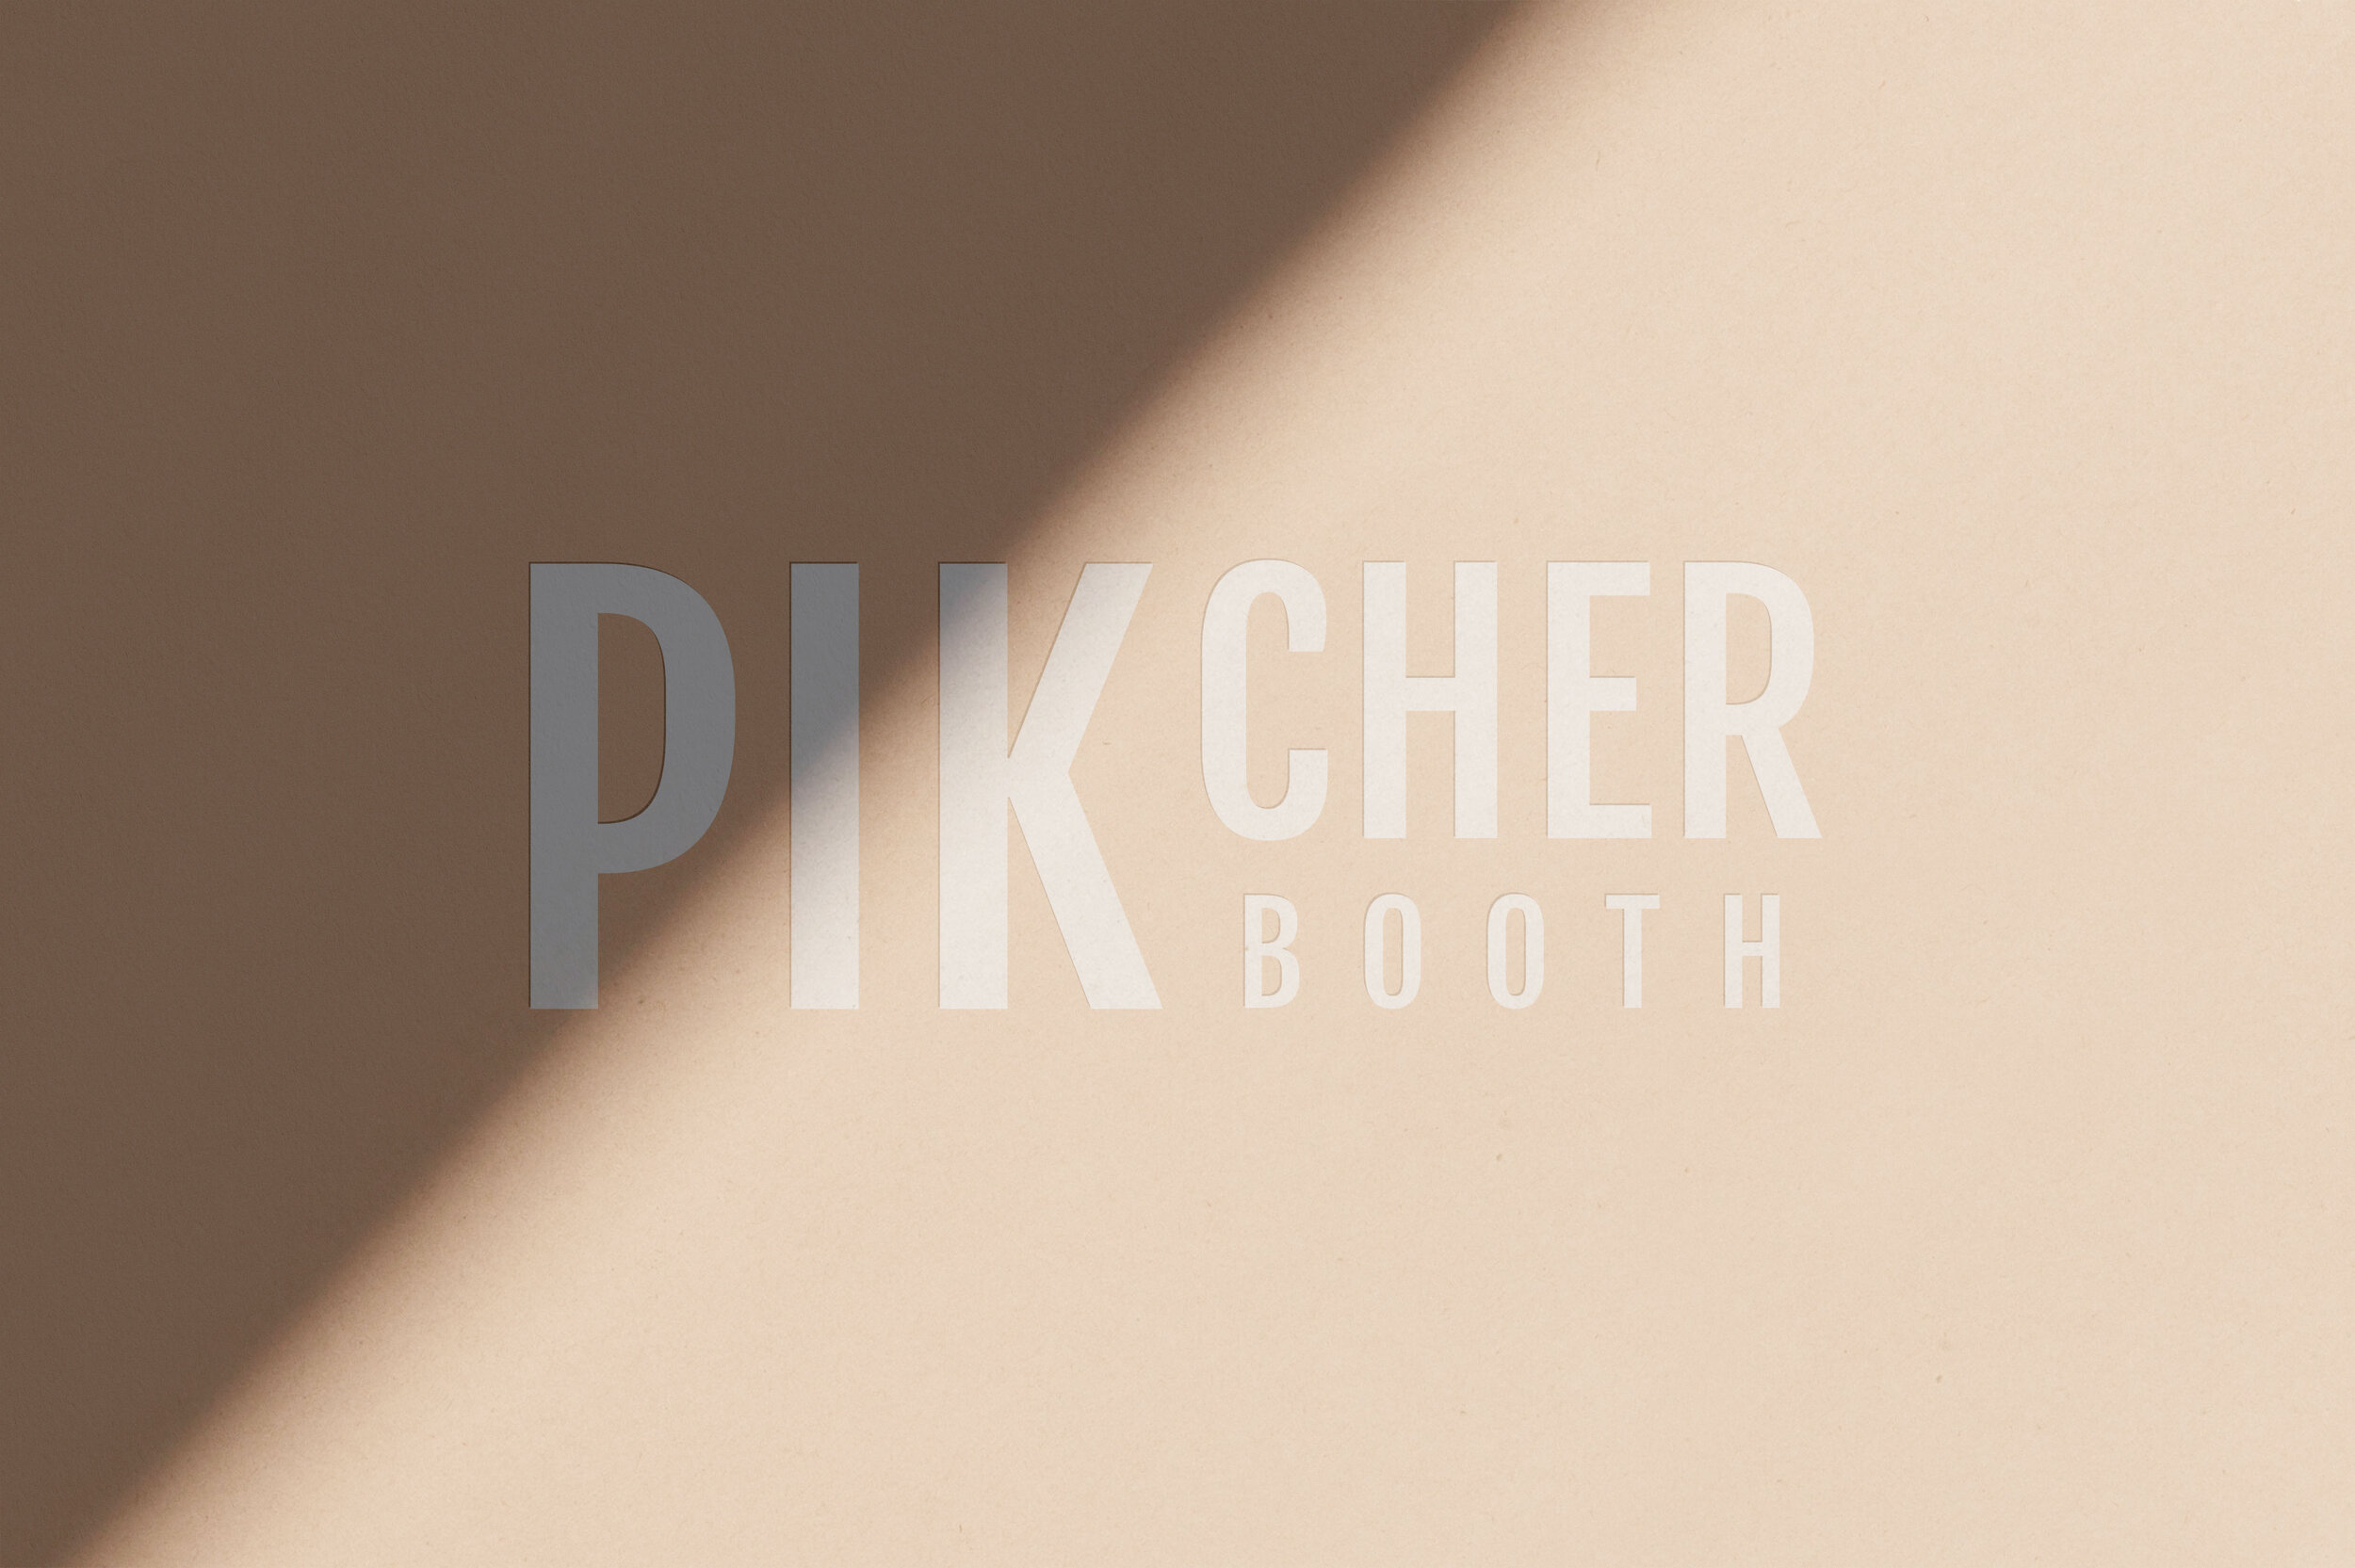 Pikcherbooth Logo By Hello Lovely Living